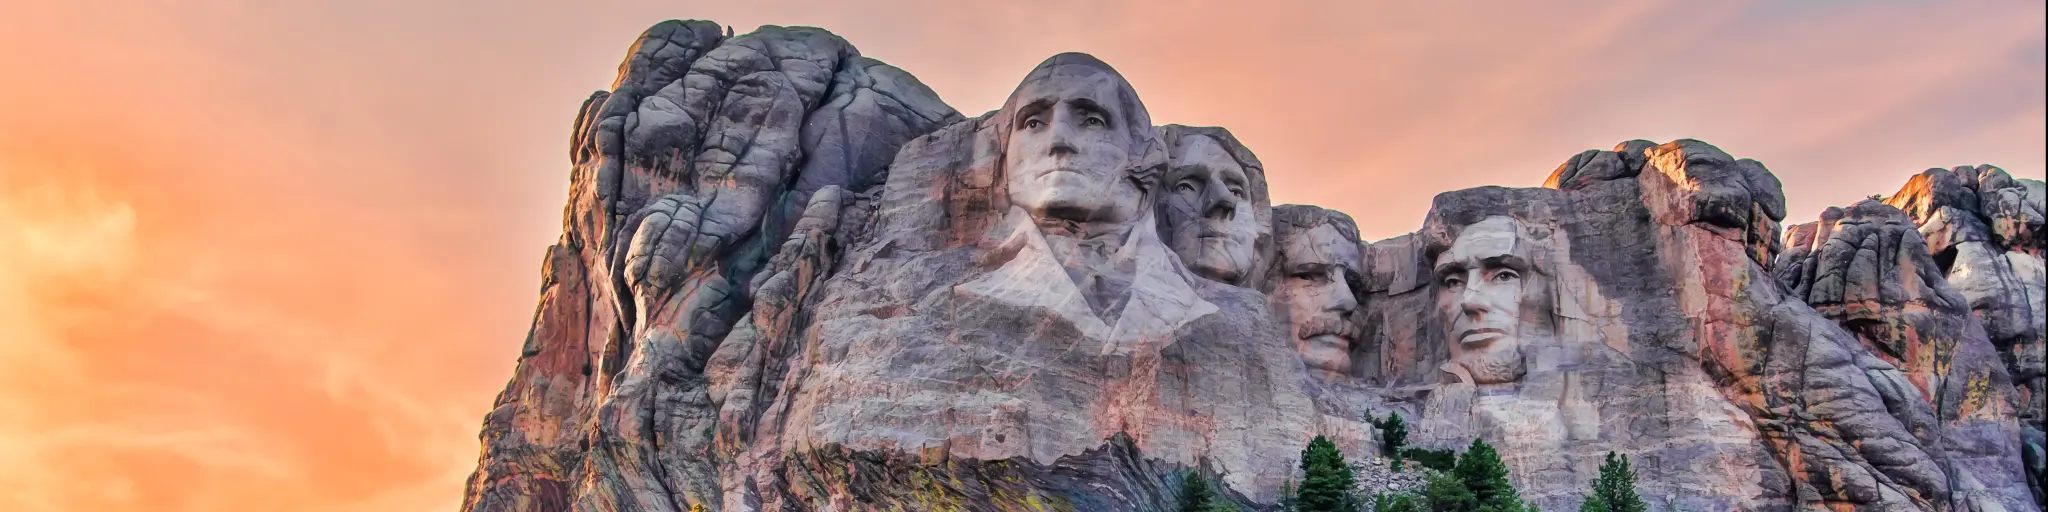 Mount Rushmore National Memorial, Black Hills region of South Dakota, USA with the famous four heads of four previous presidents carved into the granite cliffs and a red sky above.